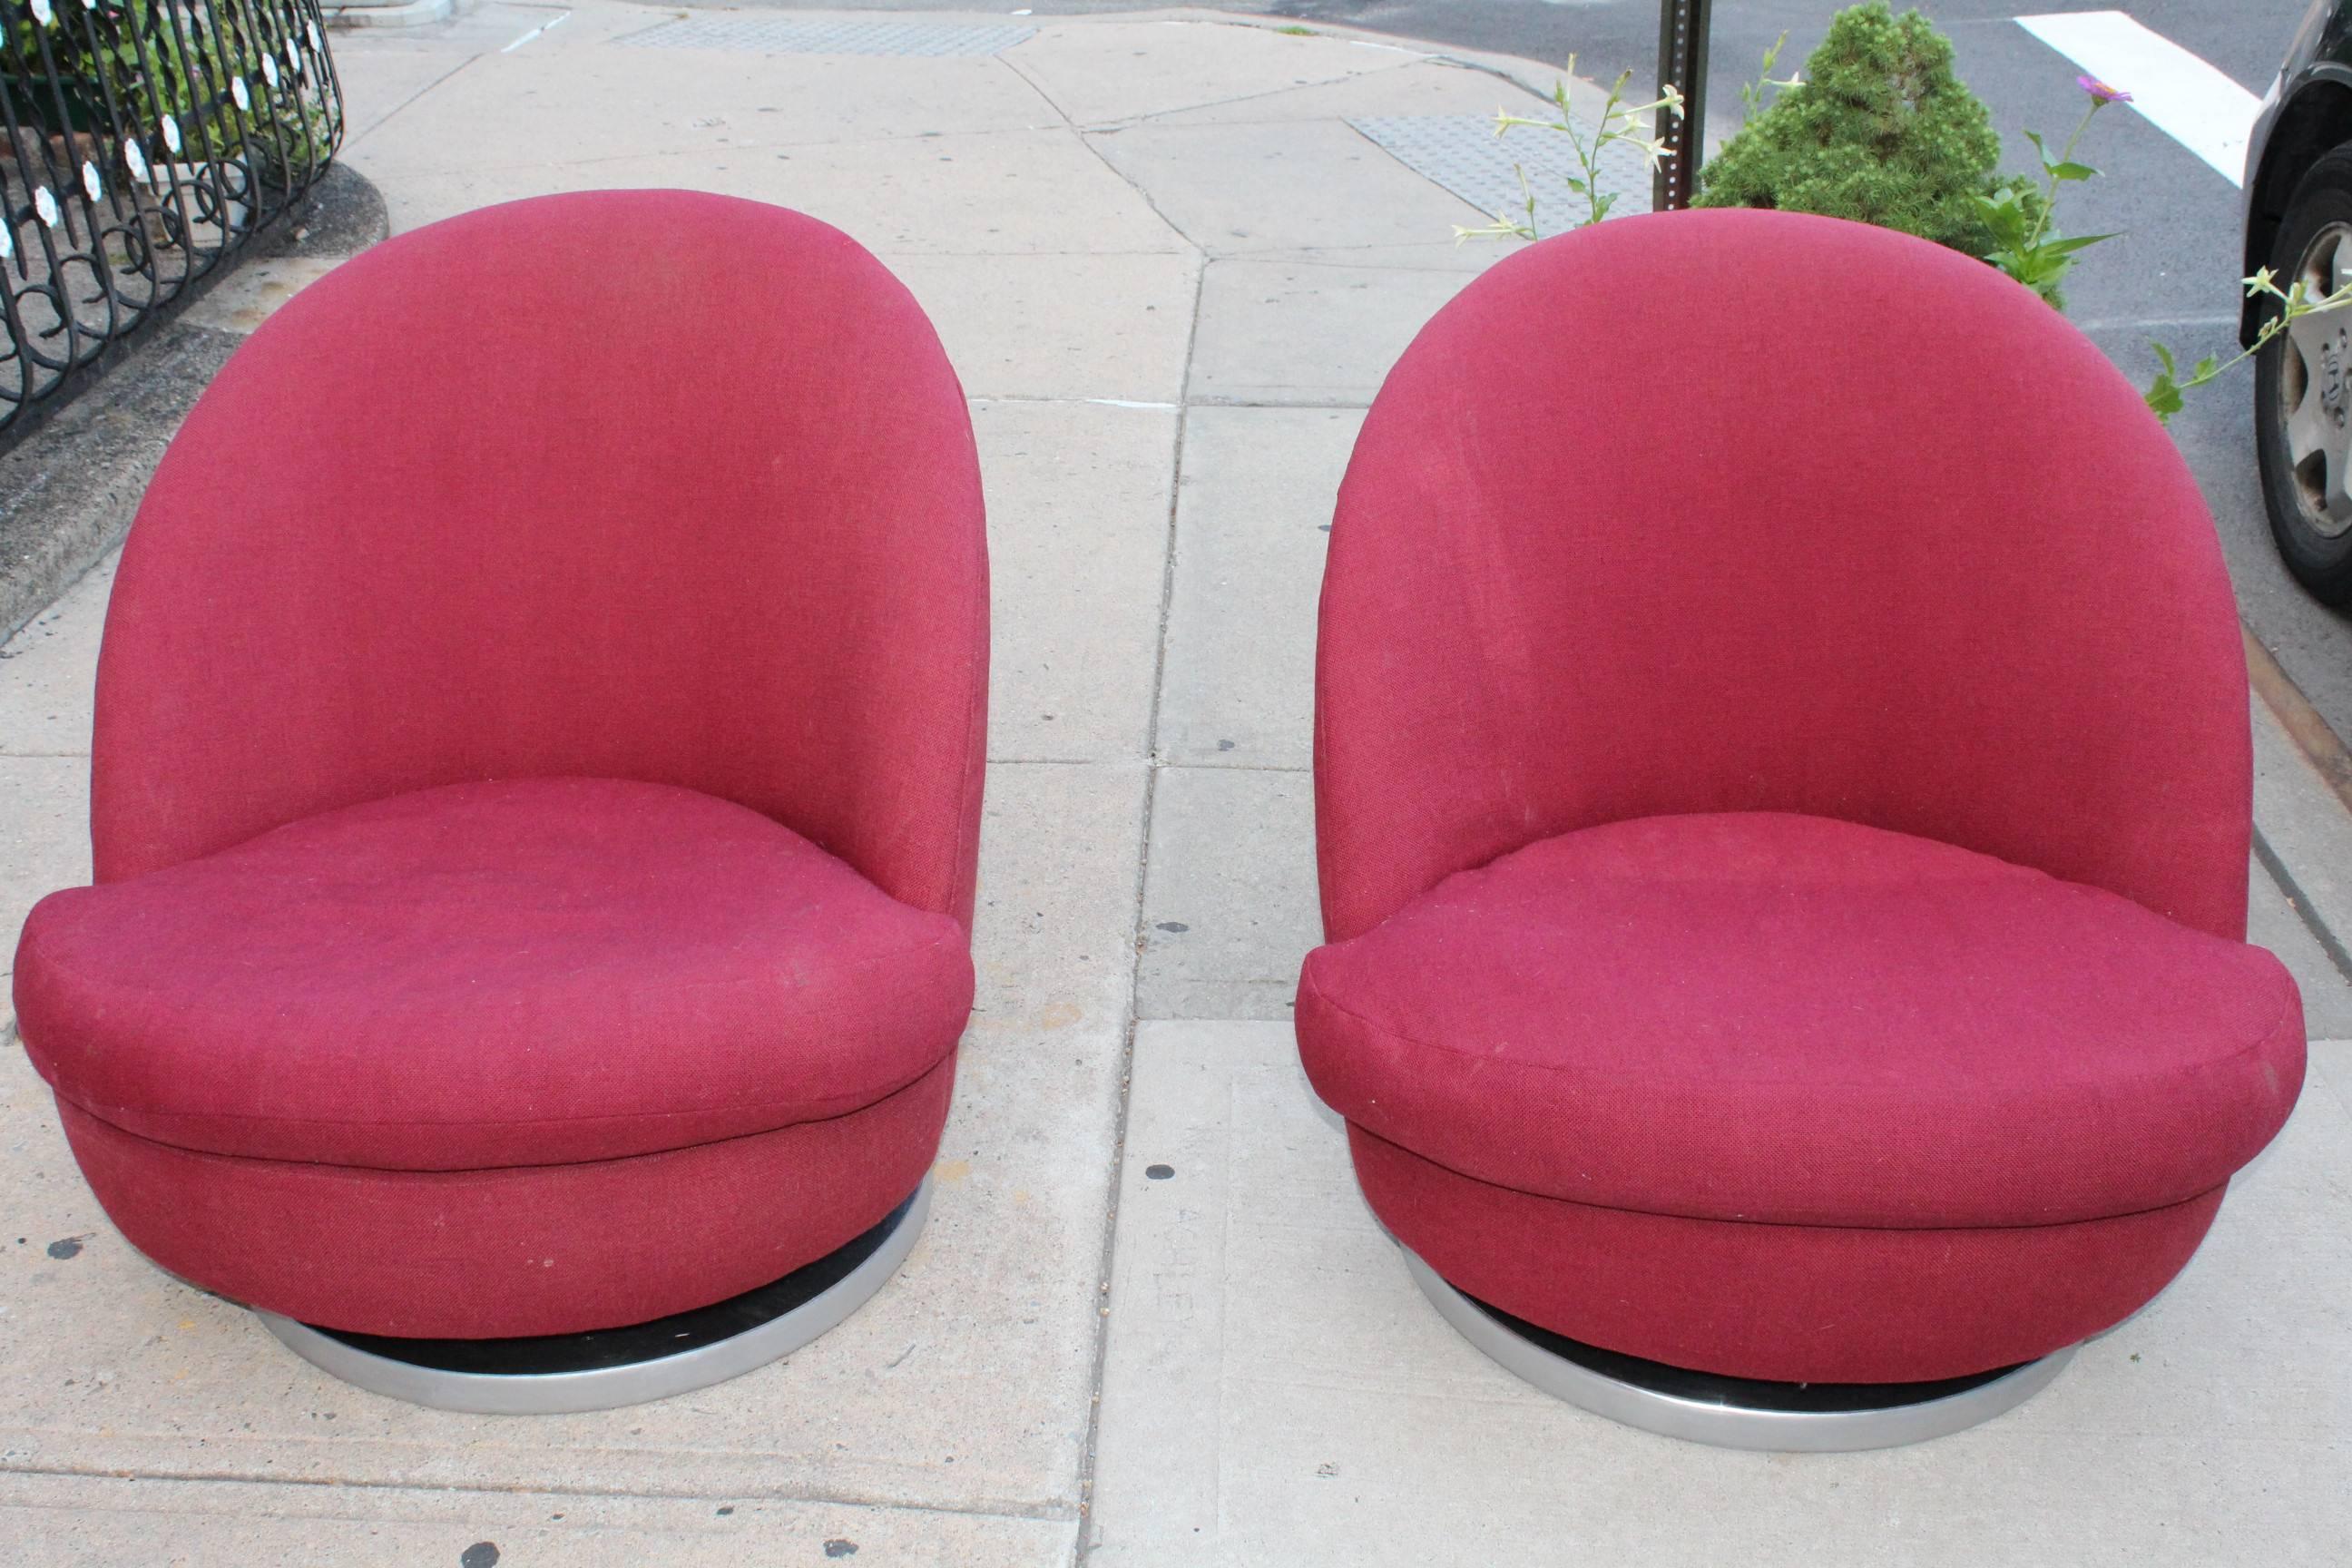 This pair of red lounge chairs by Milo Baughman for Thayer Coggin are mounted on chrome bases and date from the 1970s. Each is in vintage condition, with staining to the upholstery. There is a rip in the lining beneath the cushion of one seat.